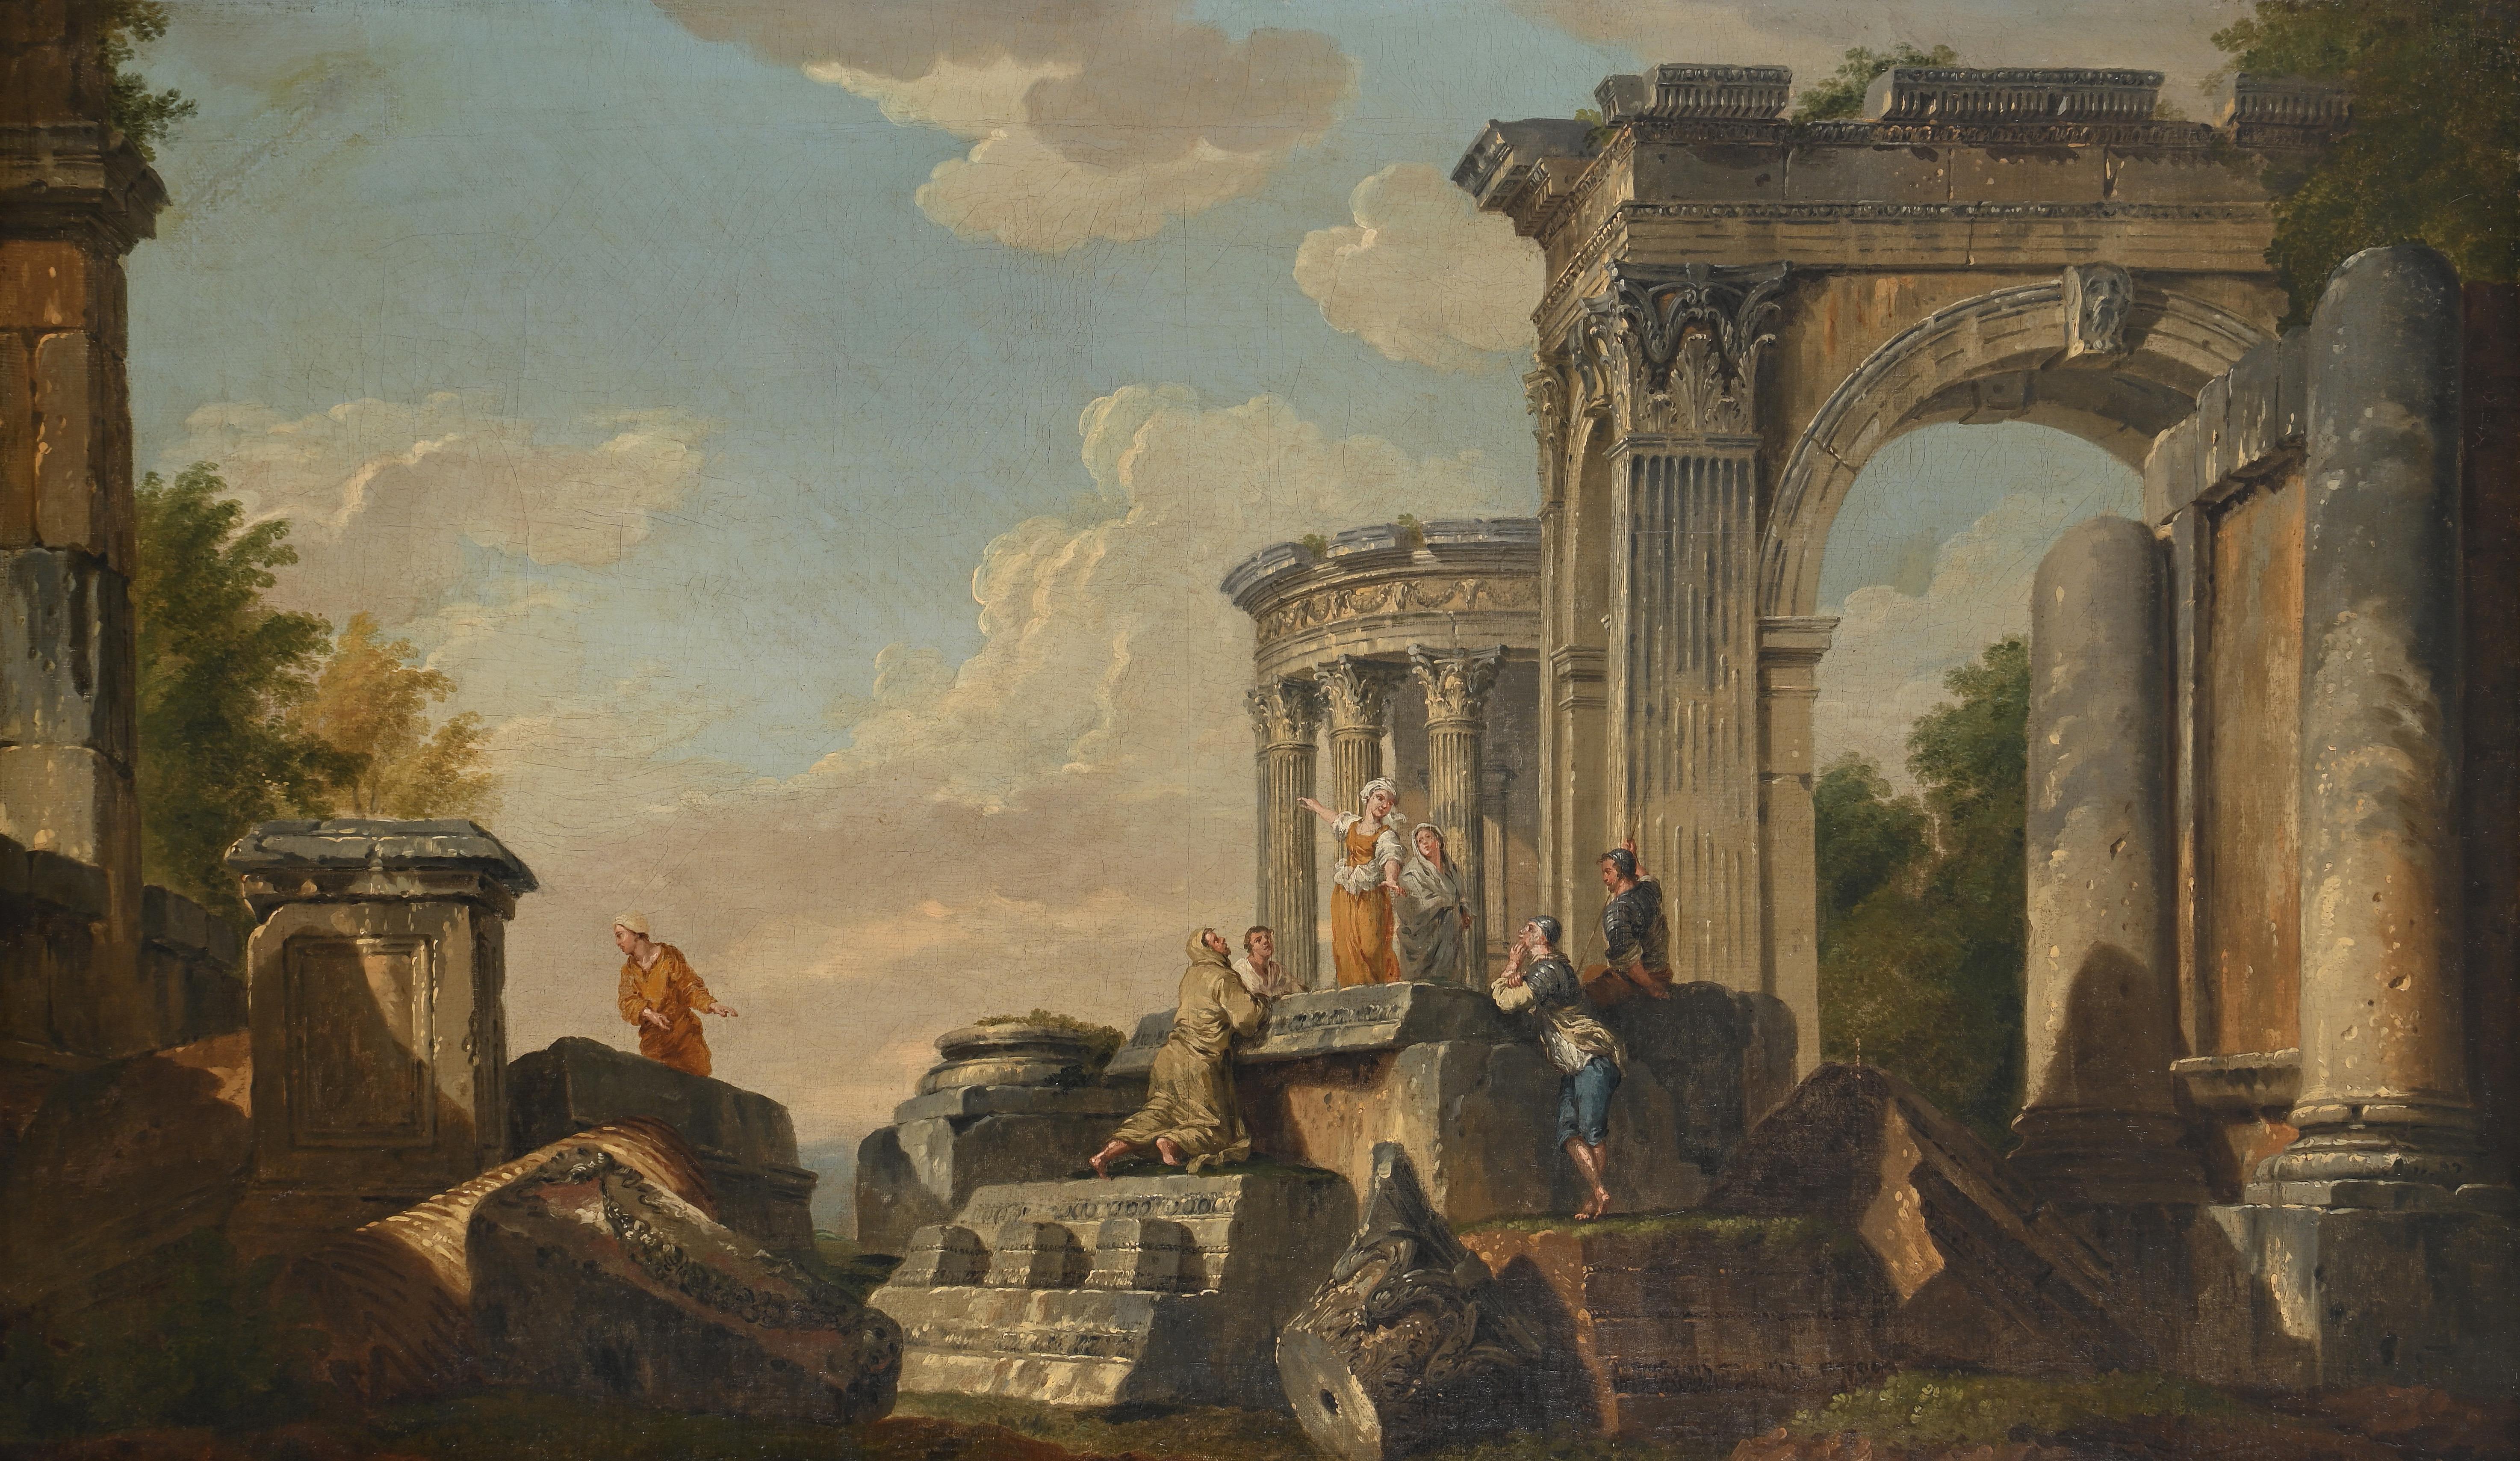 A pair of 18th century Italian landscapes with classical ruins and figures - Old Masters Painting by Giovanni Paolo Panini